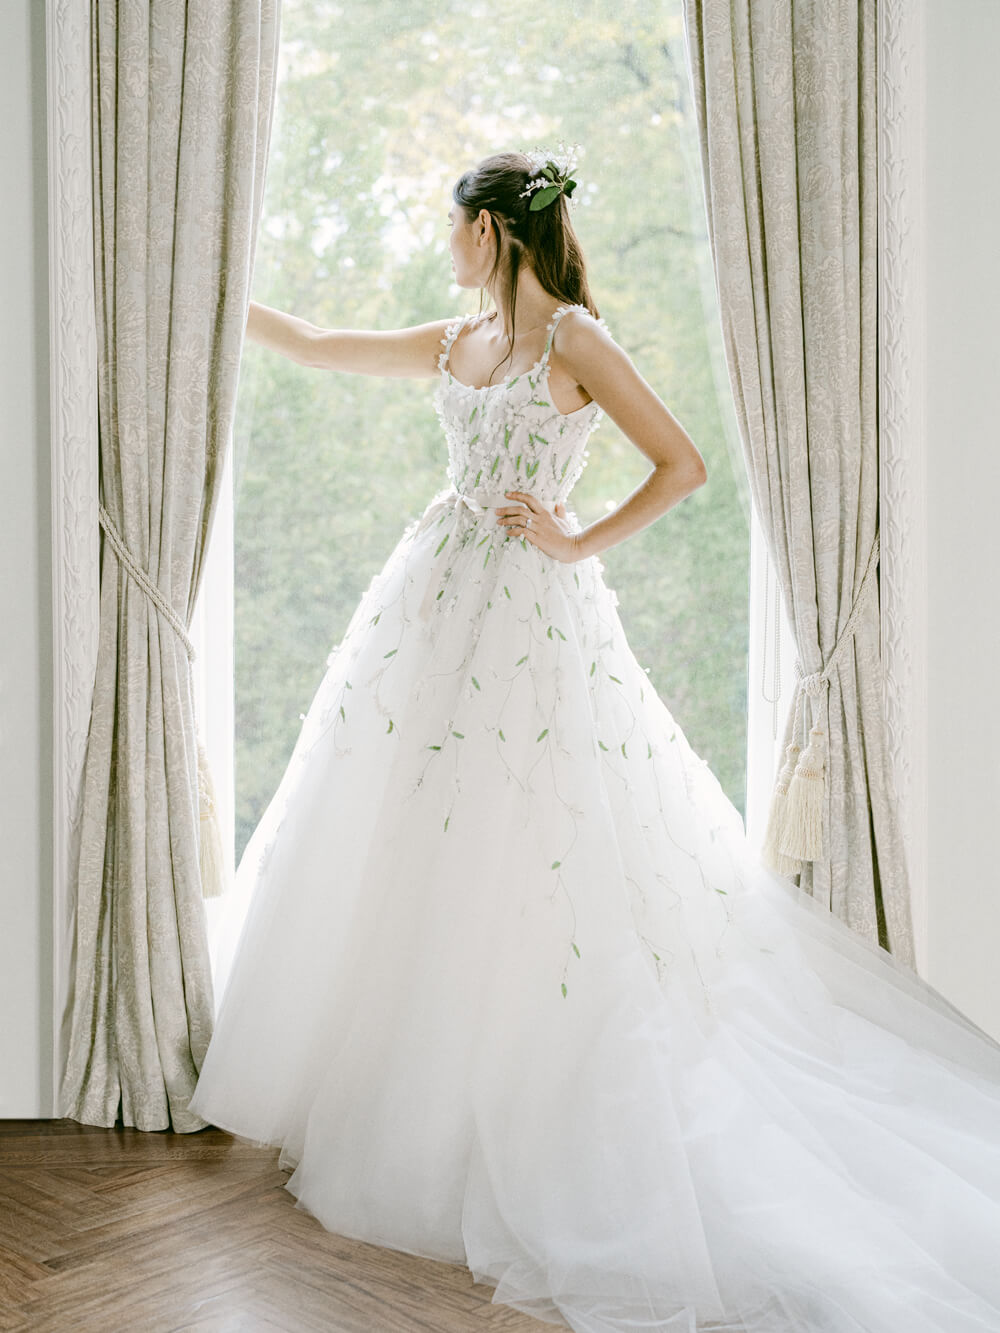 Woman in window wearing white Monique Lhuillier Fall 2021 Lily of the Valley tulle ball gown with green 3-D embroidery